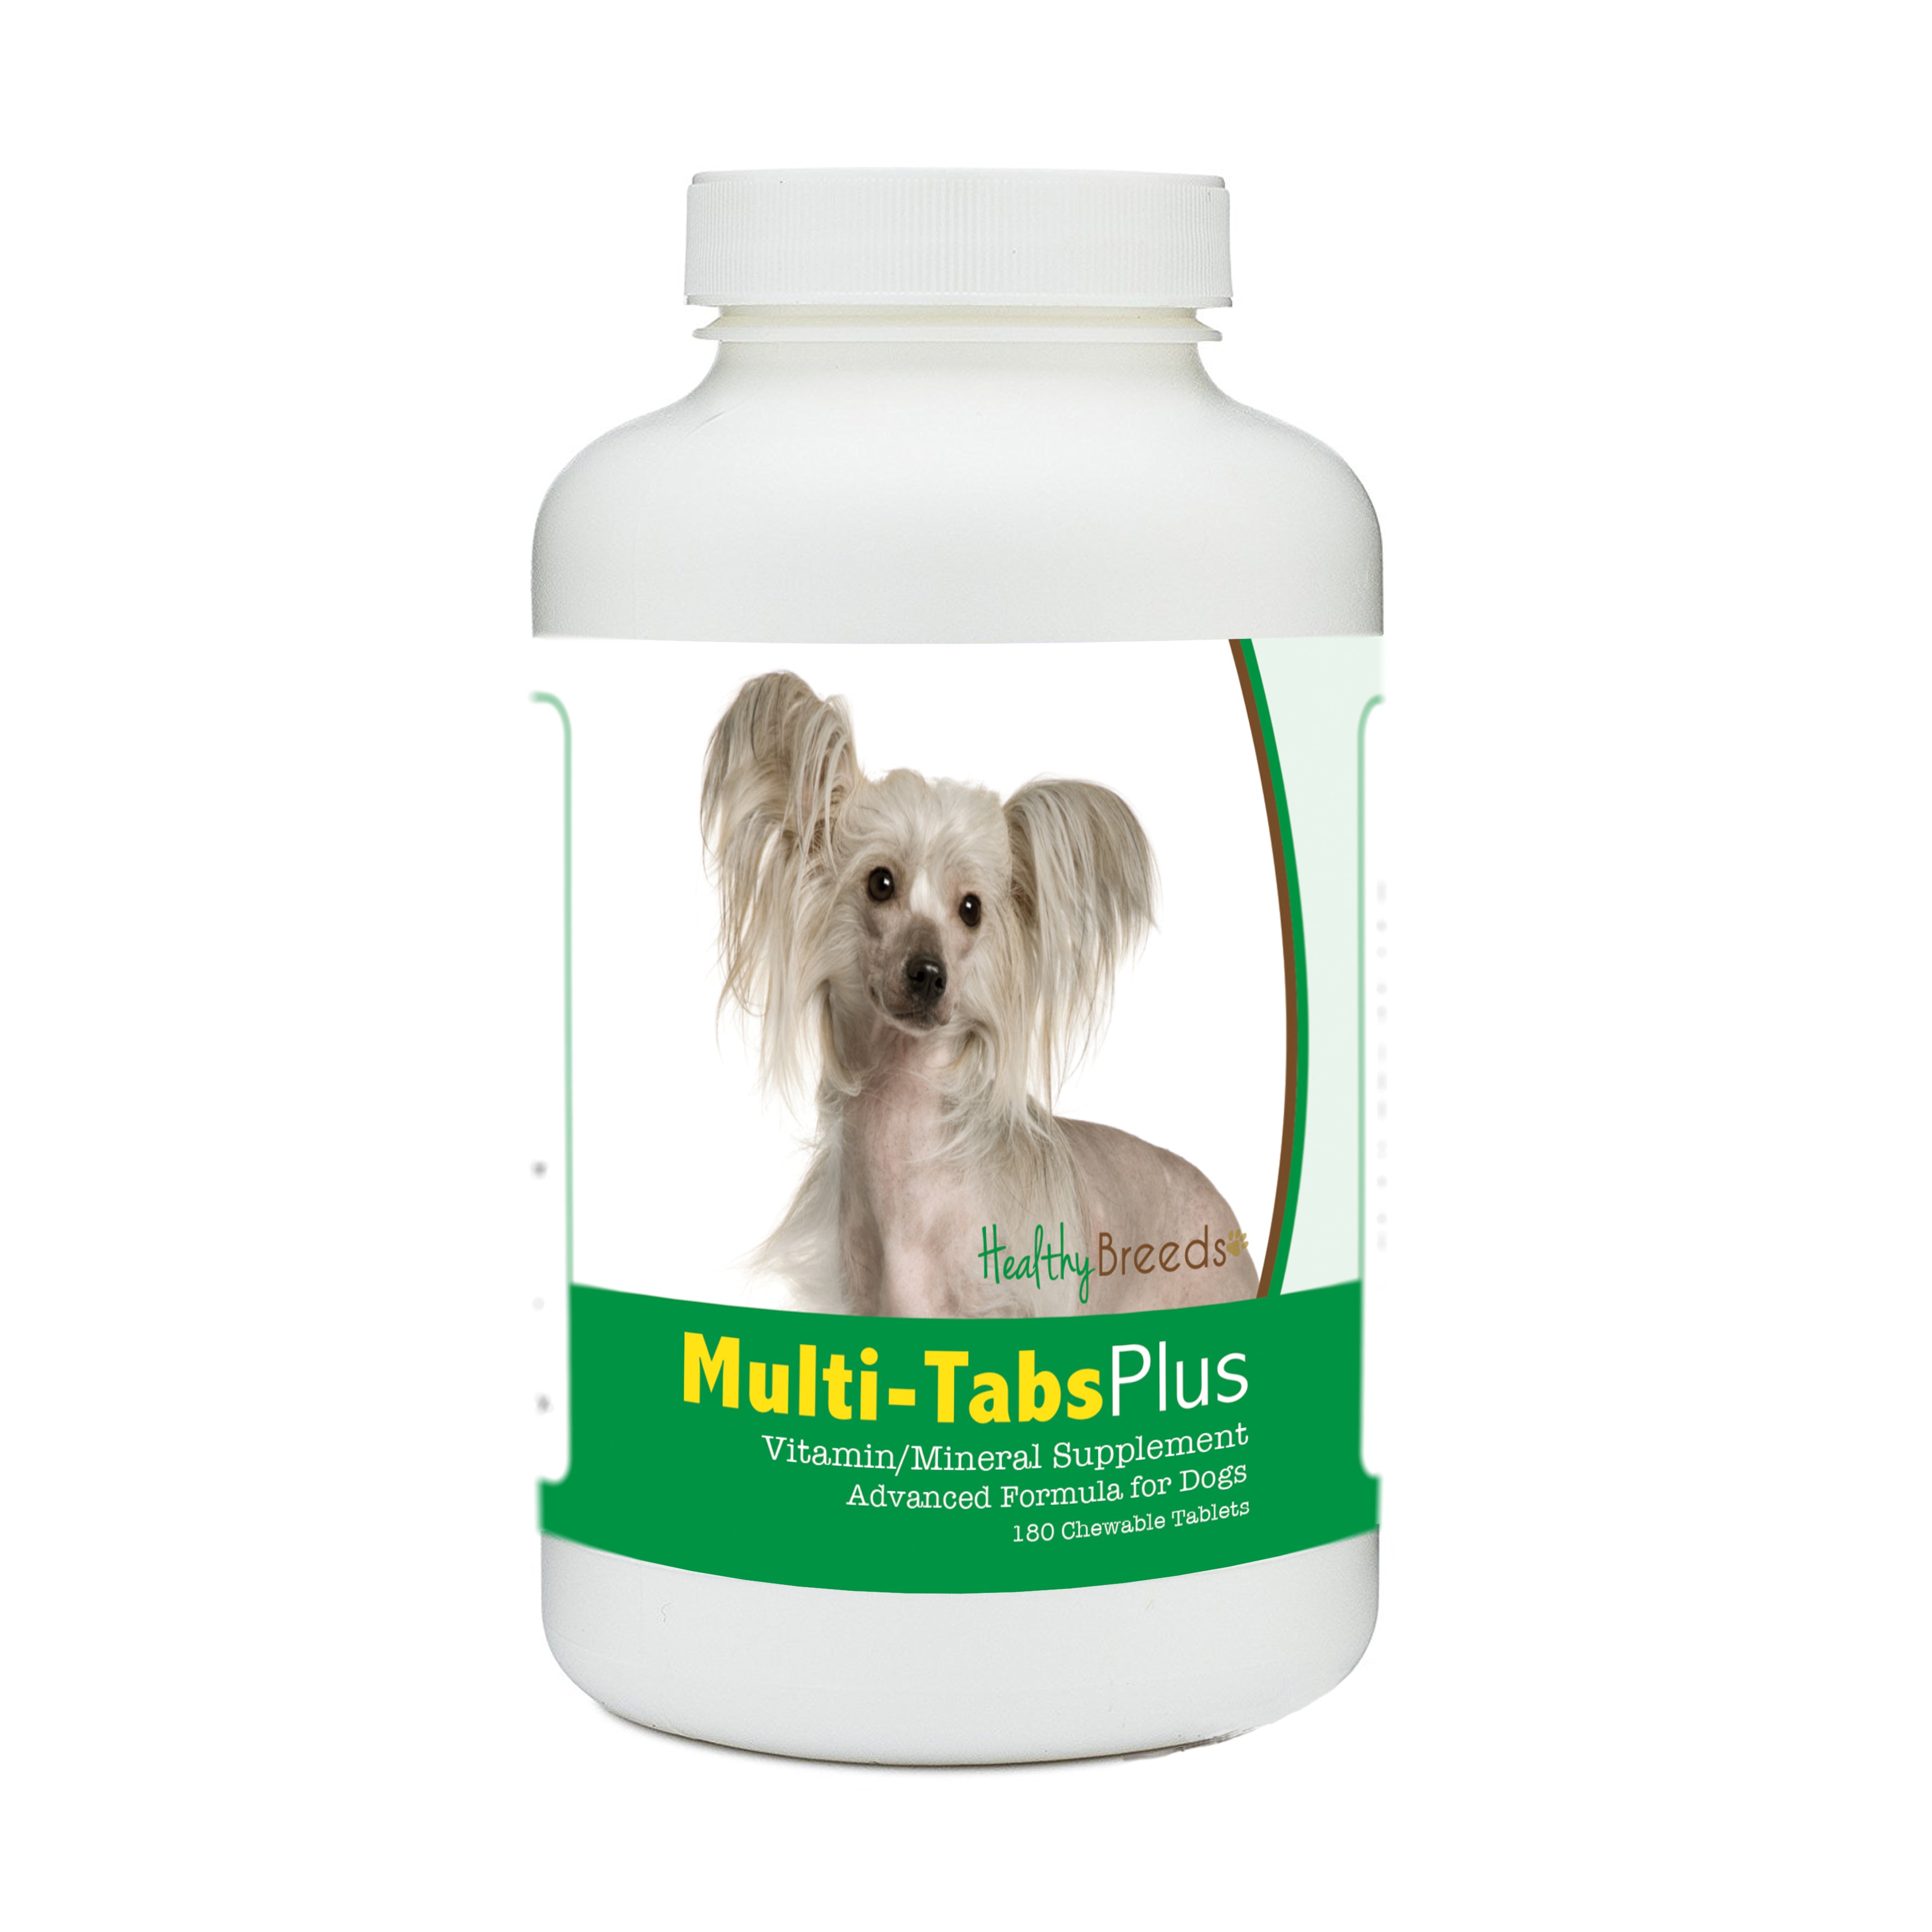 Chinese Crested Multi-Tabs Plus Chewable Tablets 180 Count